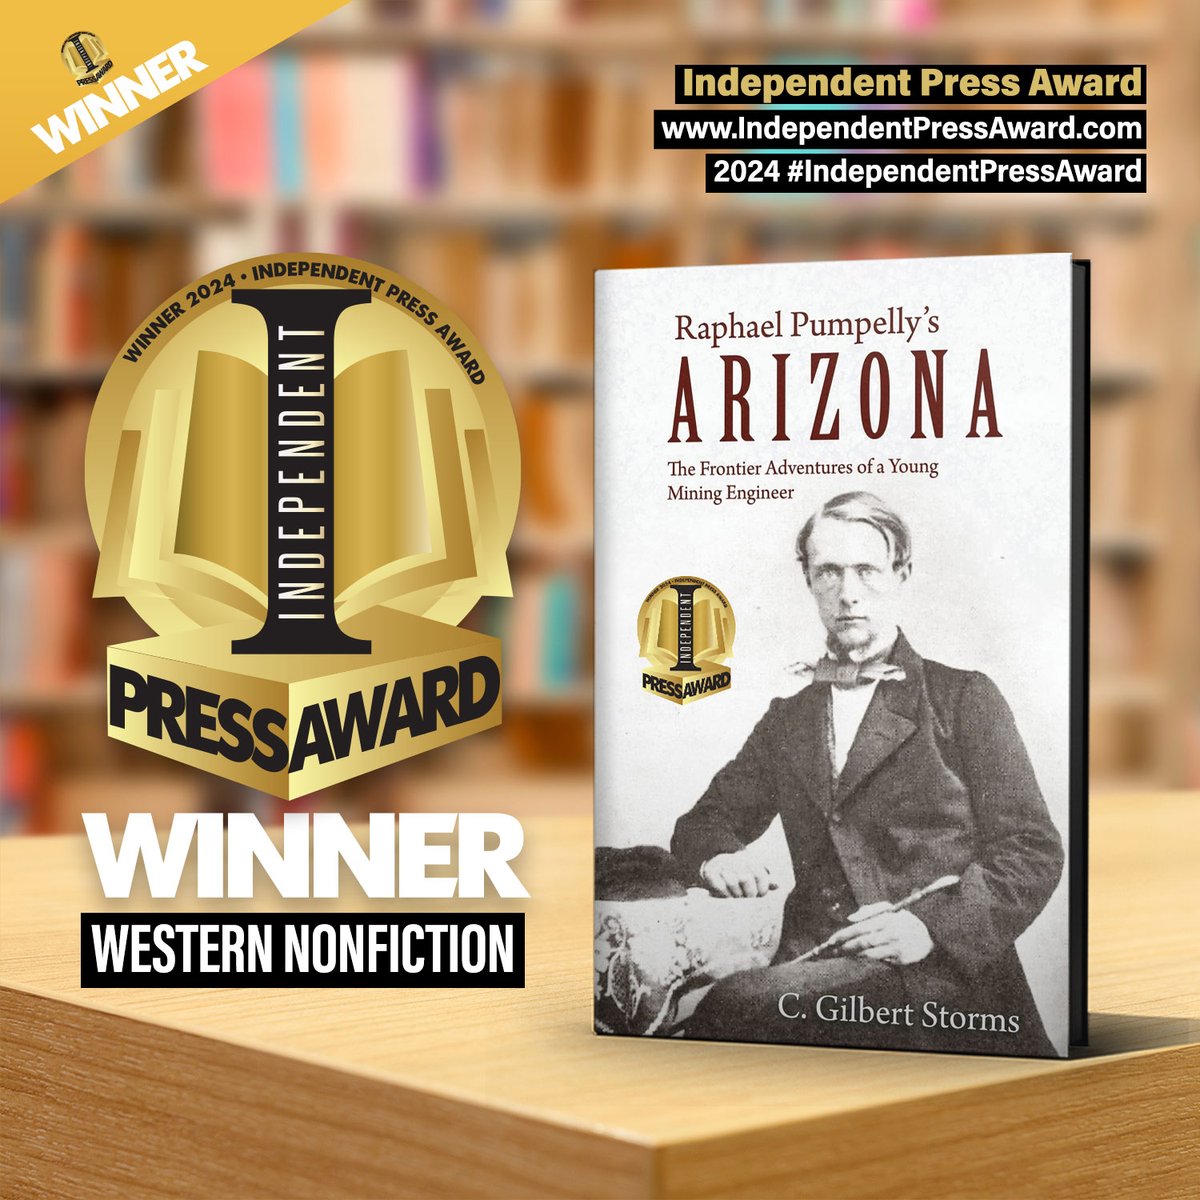 Raphael Pumpelly's Arizona: The Frontier Adventures of a Young Mining Engineer by C. Gilbert Storms independentpressaward.com/2024winners/97… With lively prose and vivid detail depicting the people and events shaping the Grand Canyon State, Pumpelly's writings have been a resource for historians…